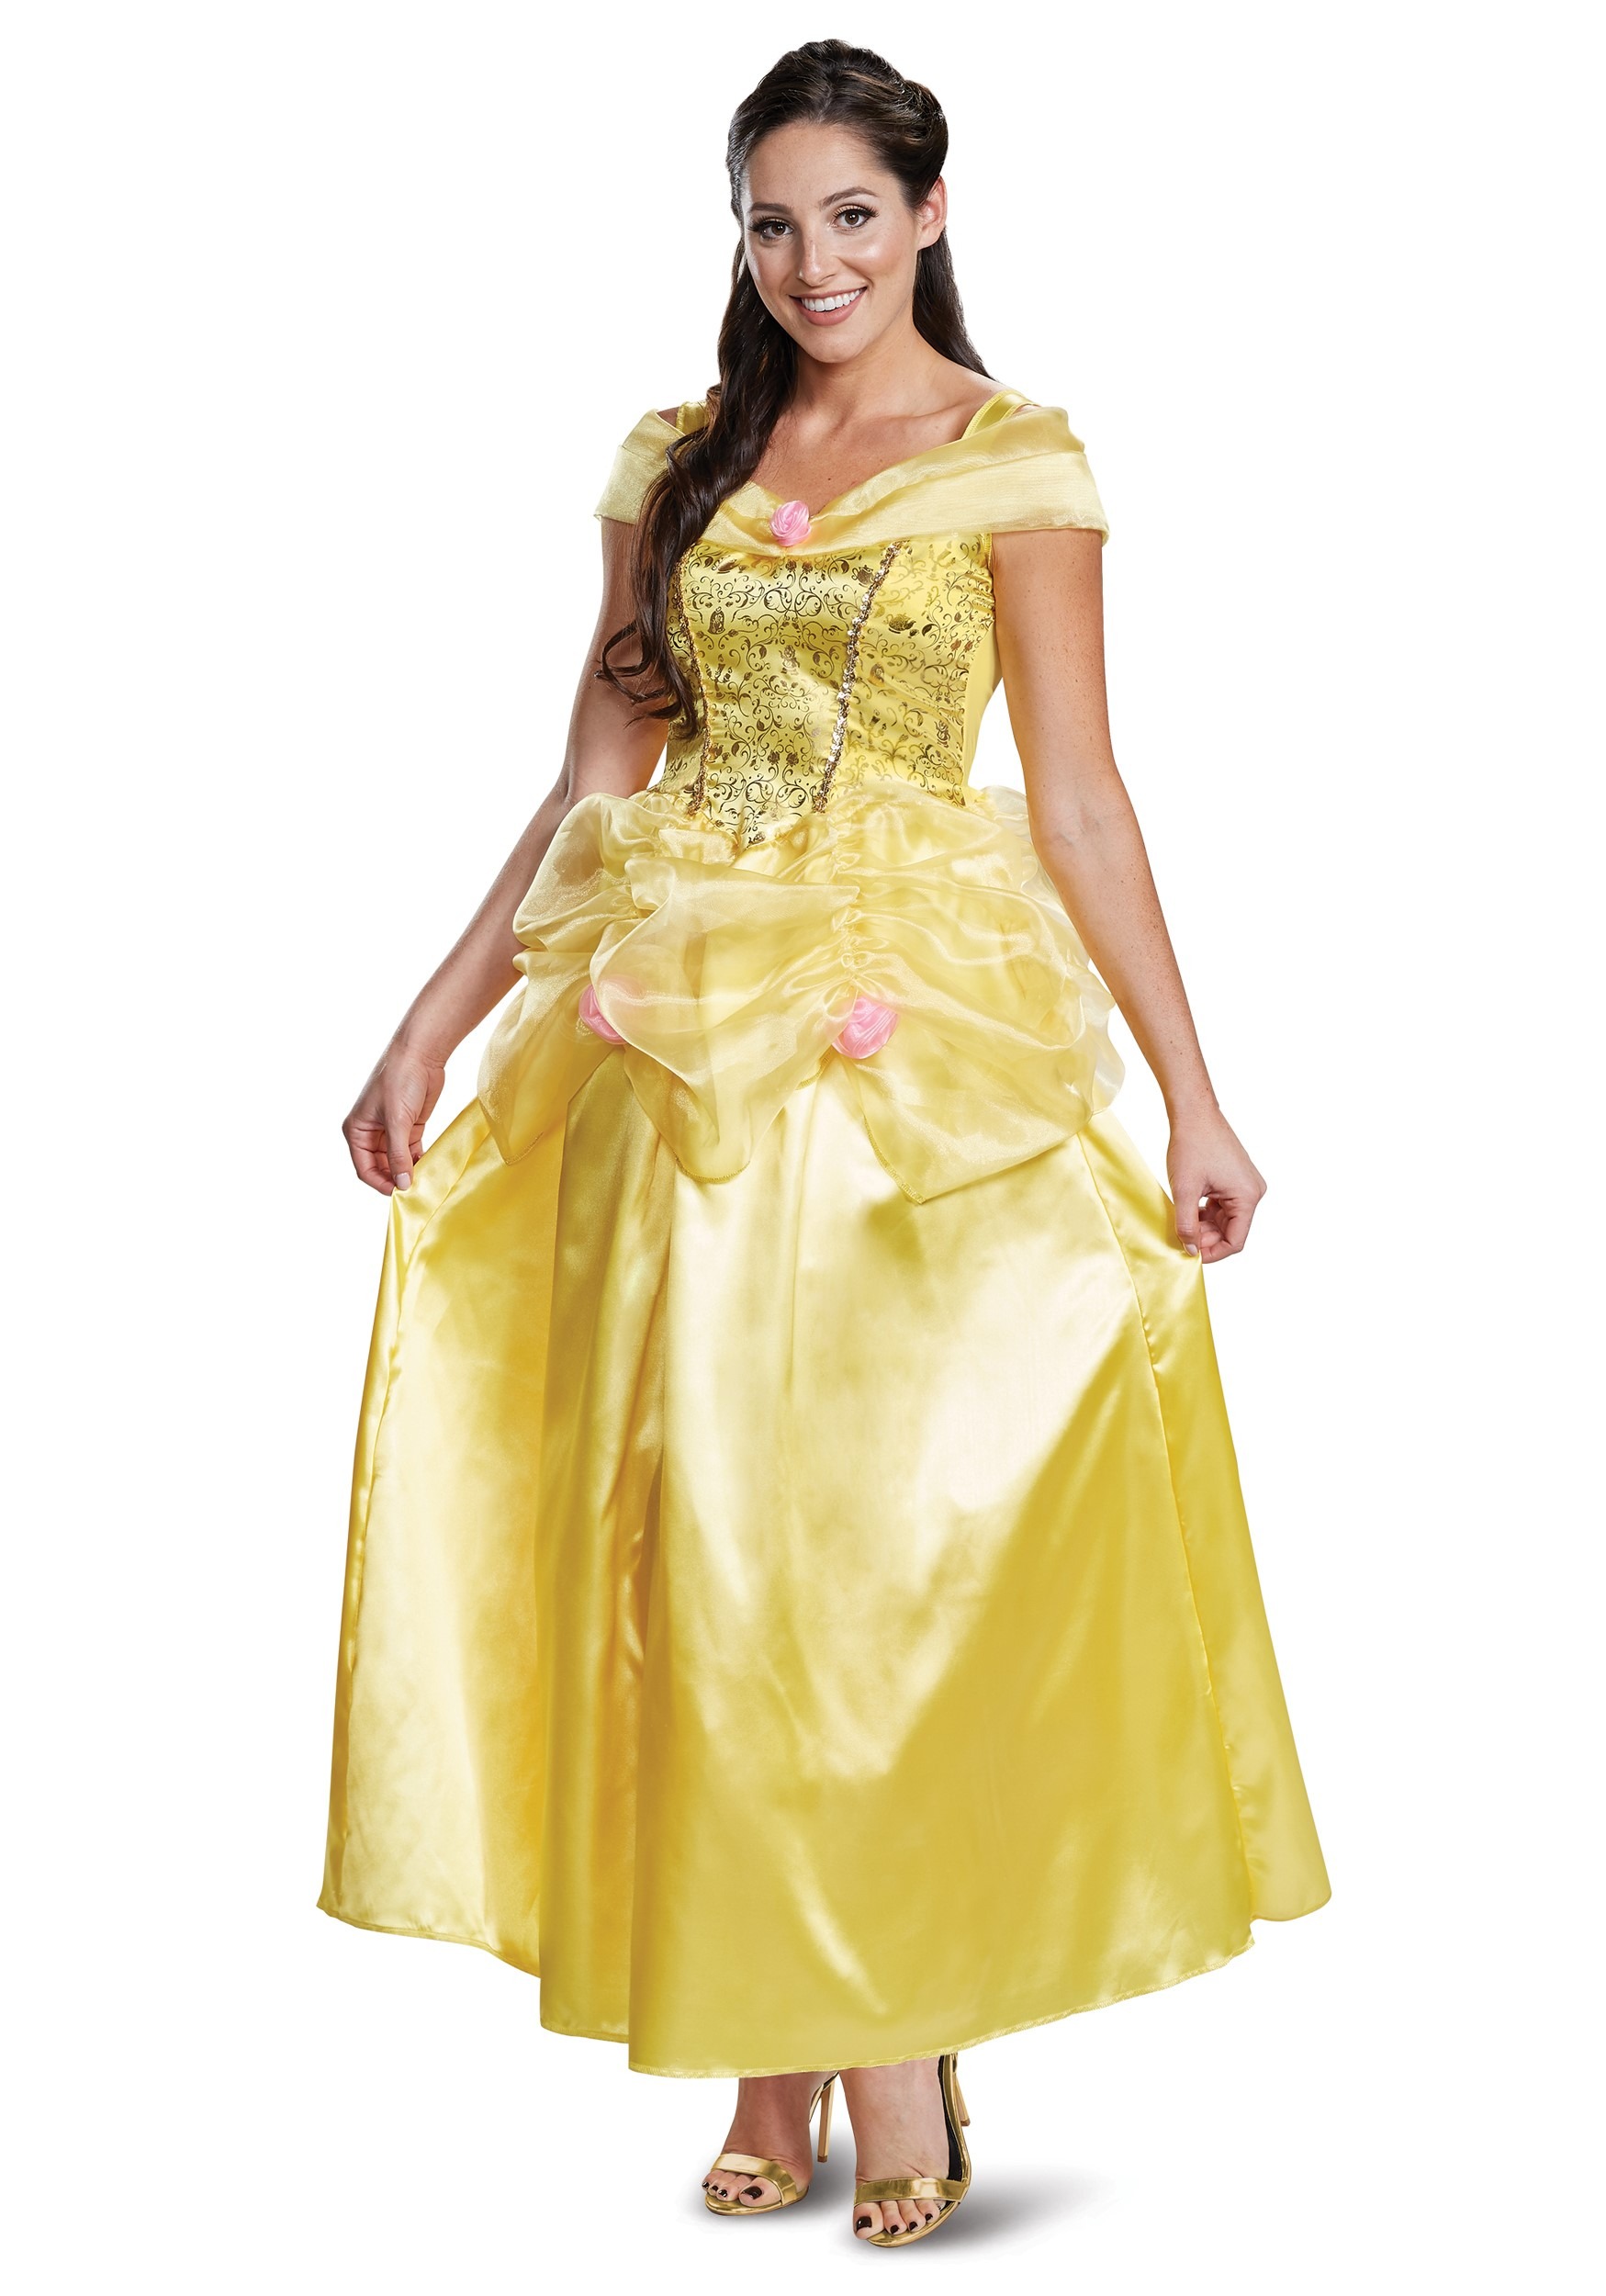 Image of Disney Belle Dress | The Beast Deluxe Classic Belle Costume ID DI67282-M